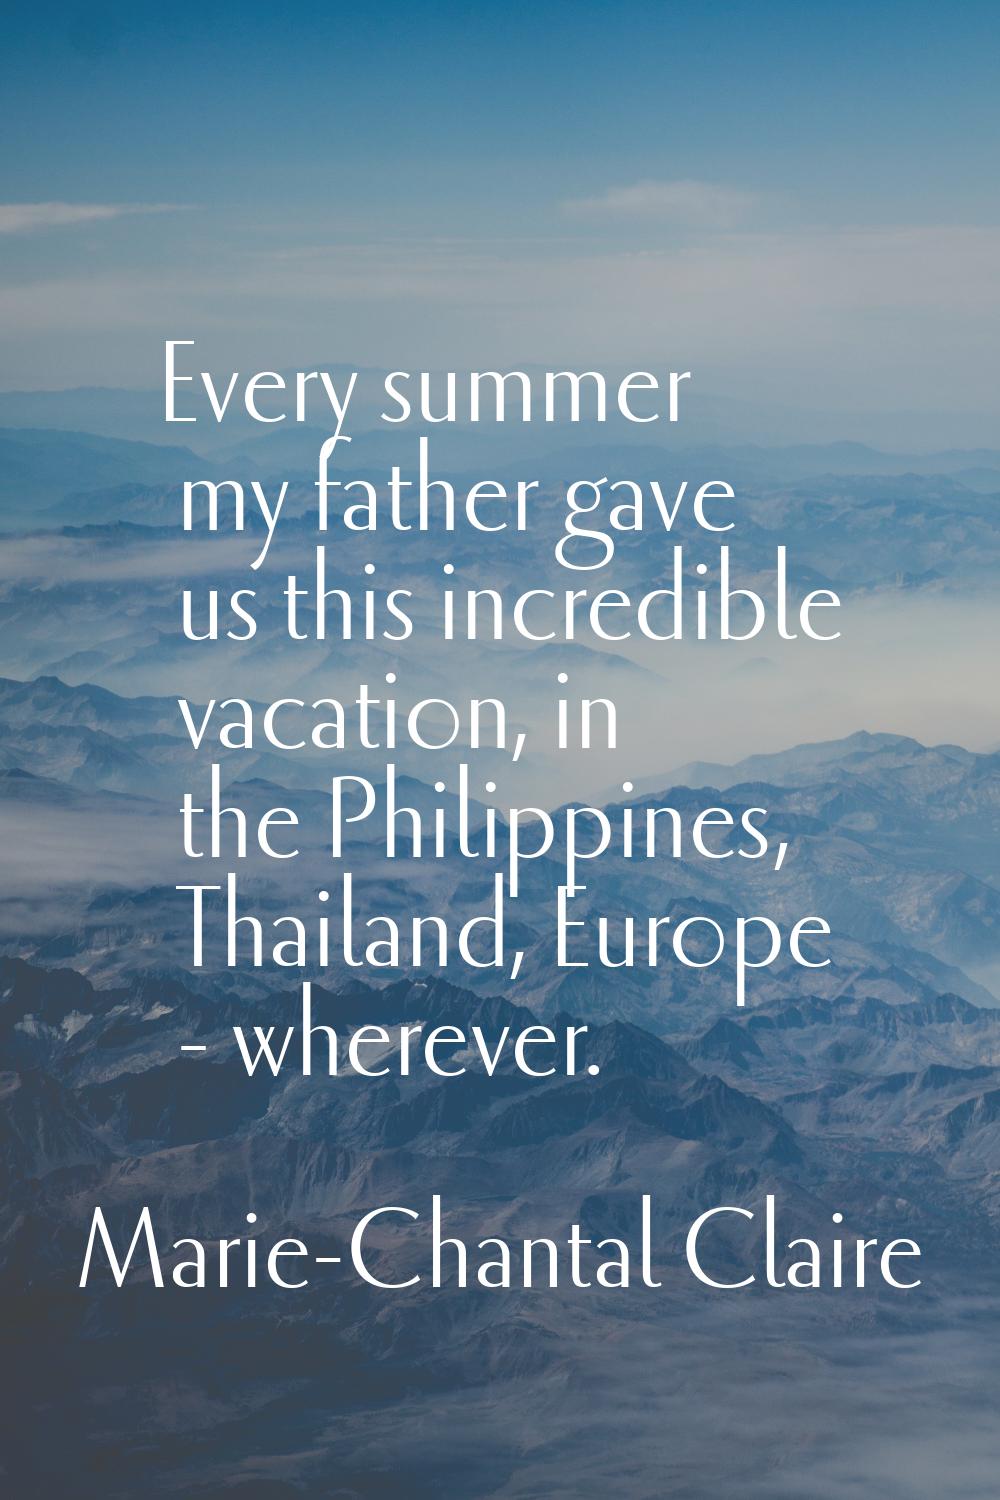 Every summer my father gave us this incredible vacation, in the Philippines, Thailand, Europe - whe